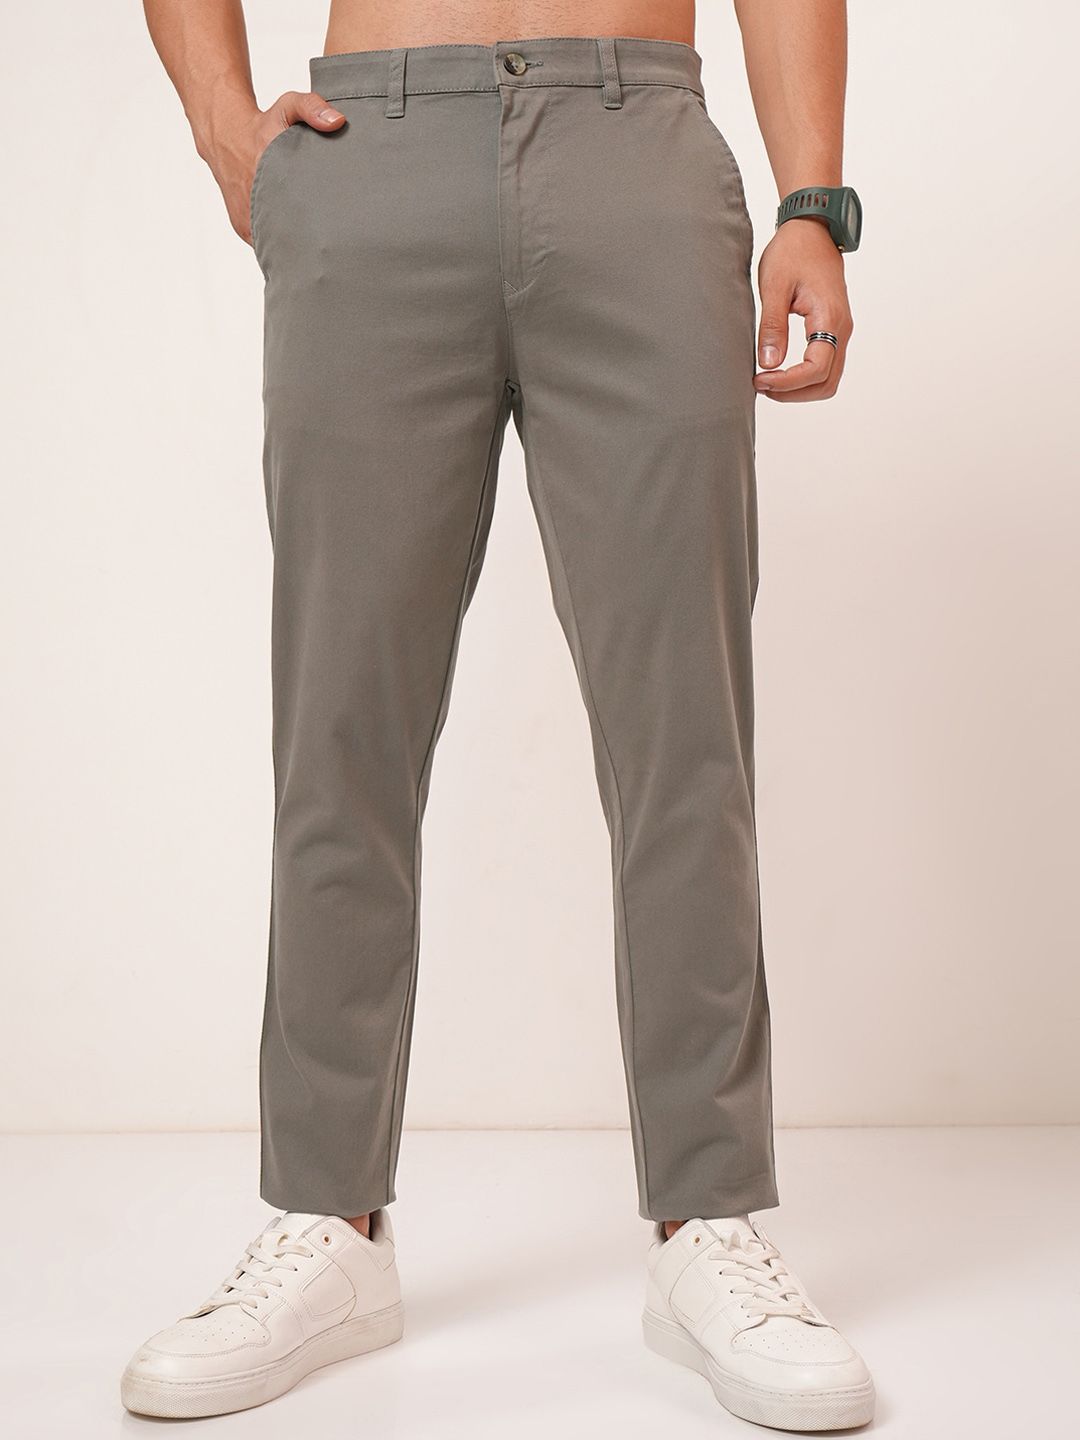 HIGHLANDER Grey Men Tapered Fit Chinos Trousers